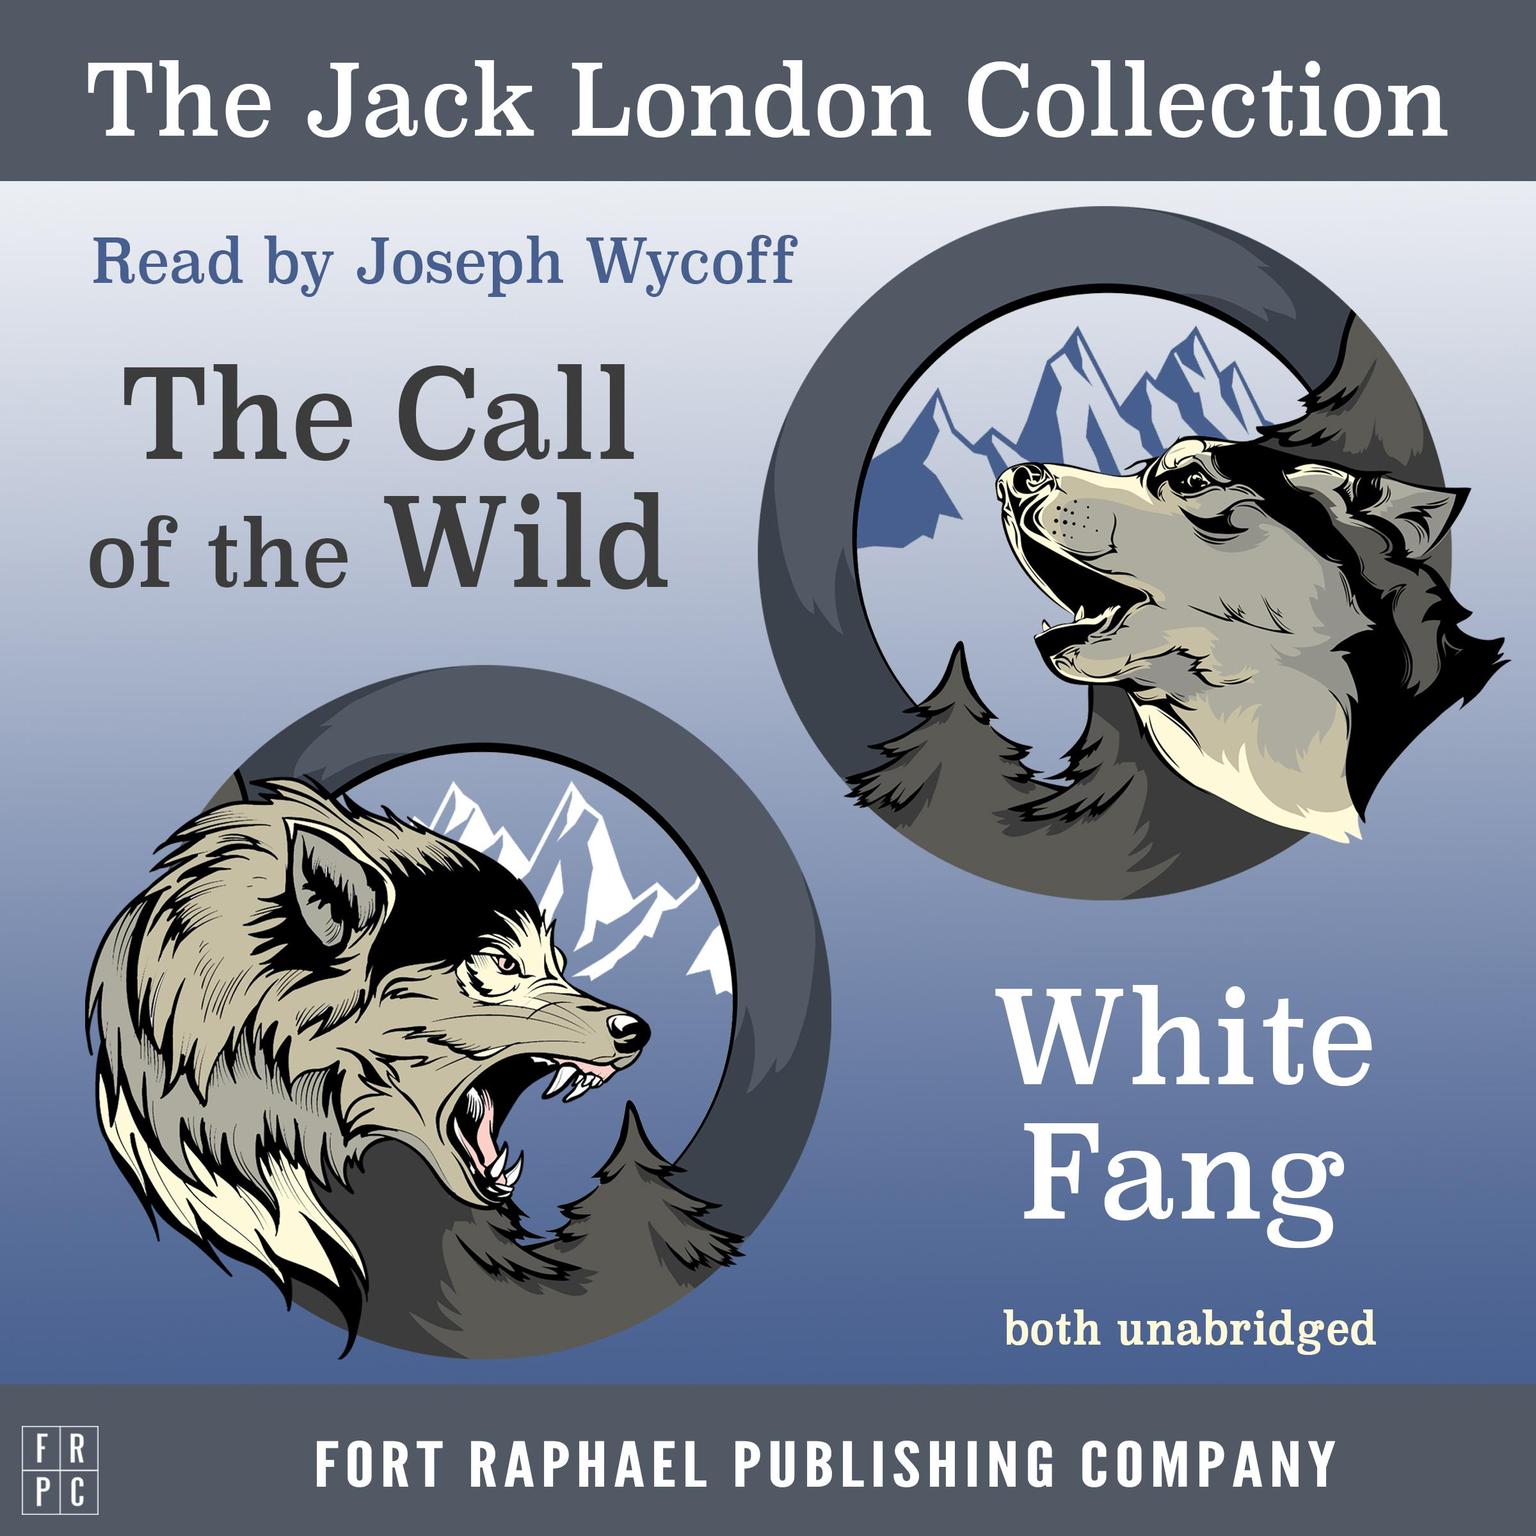 The Jack London Collection - Call of the Wild and White Fang - Unabridged Audiobook, by Jack London